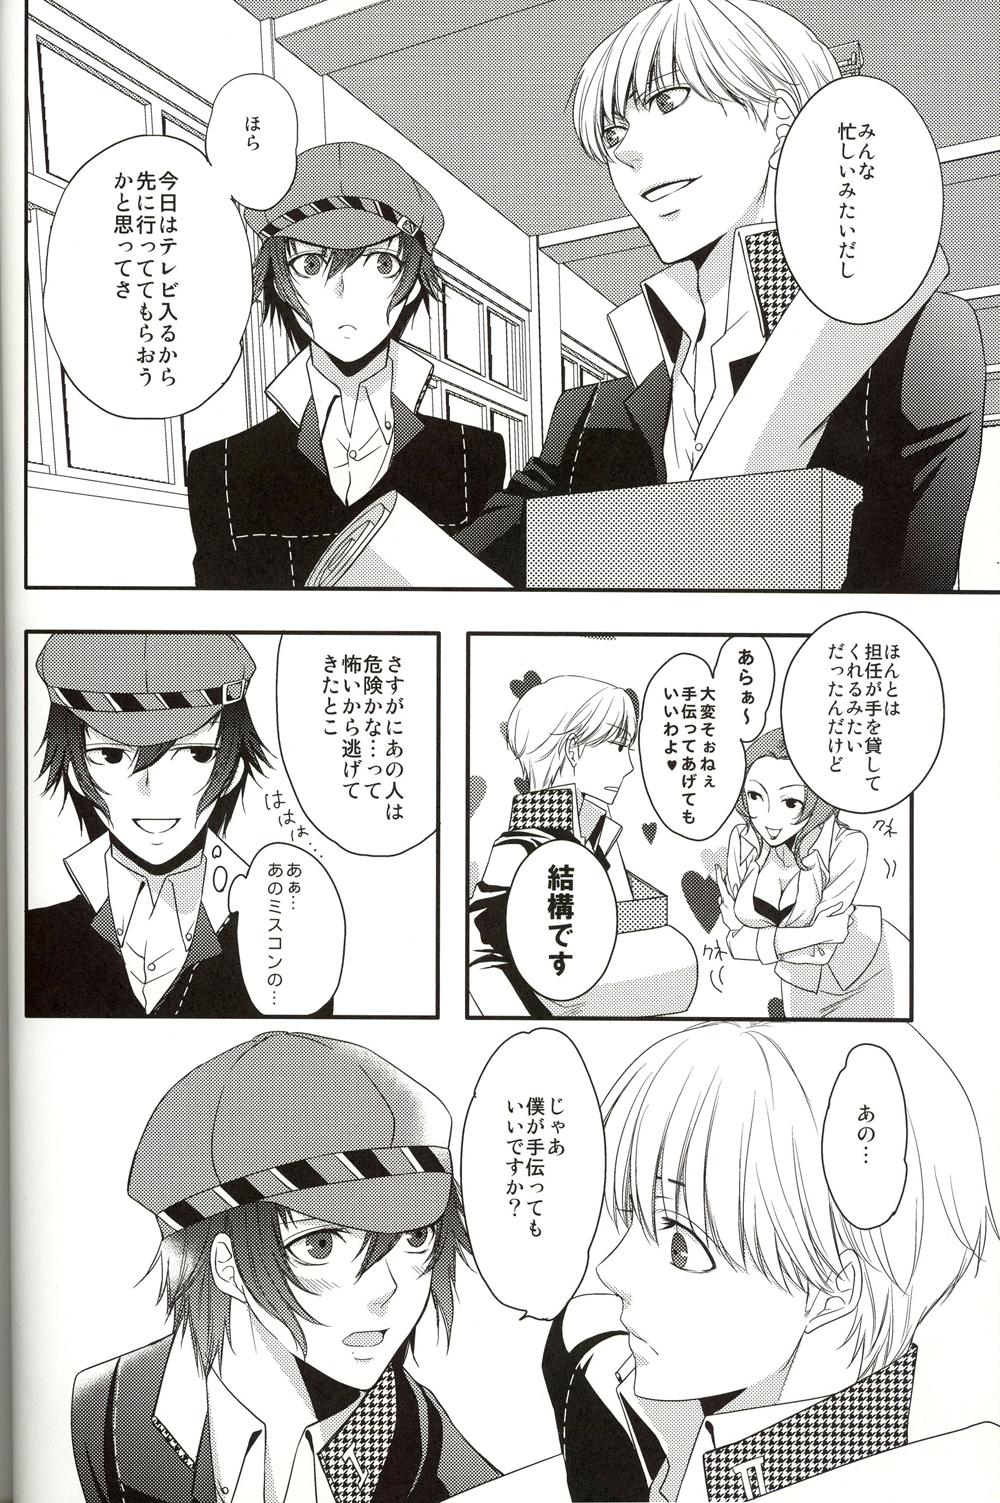 Ink RE:RE:AN - Persona 4 Hunks - Page 5